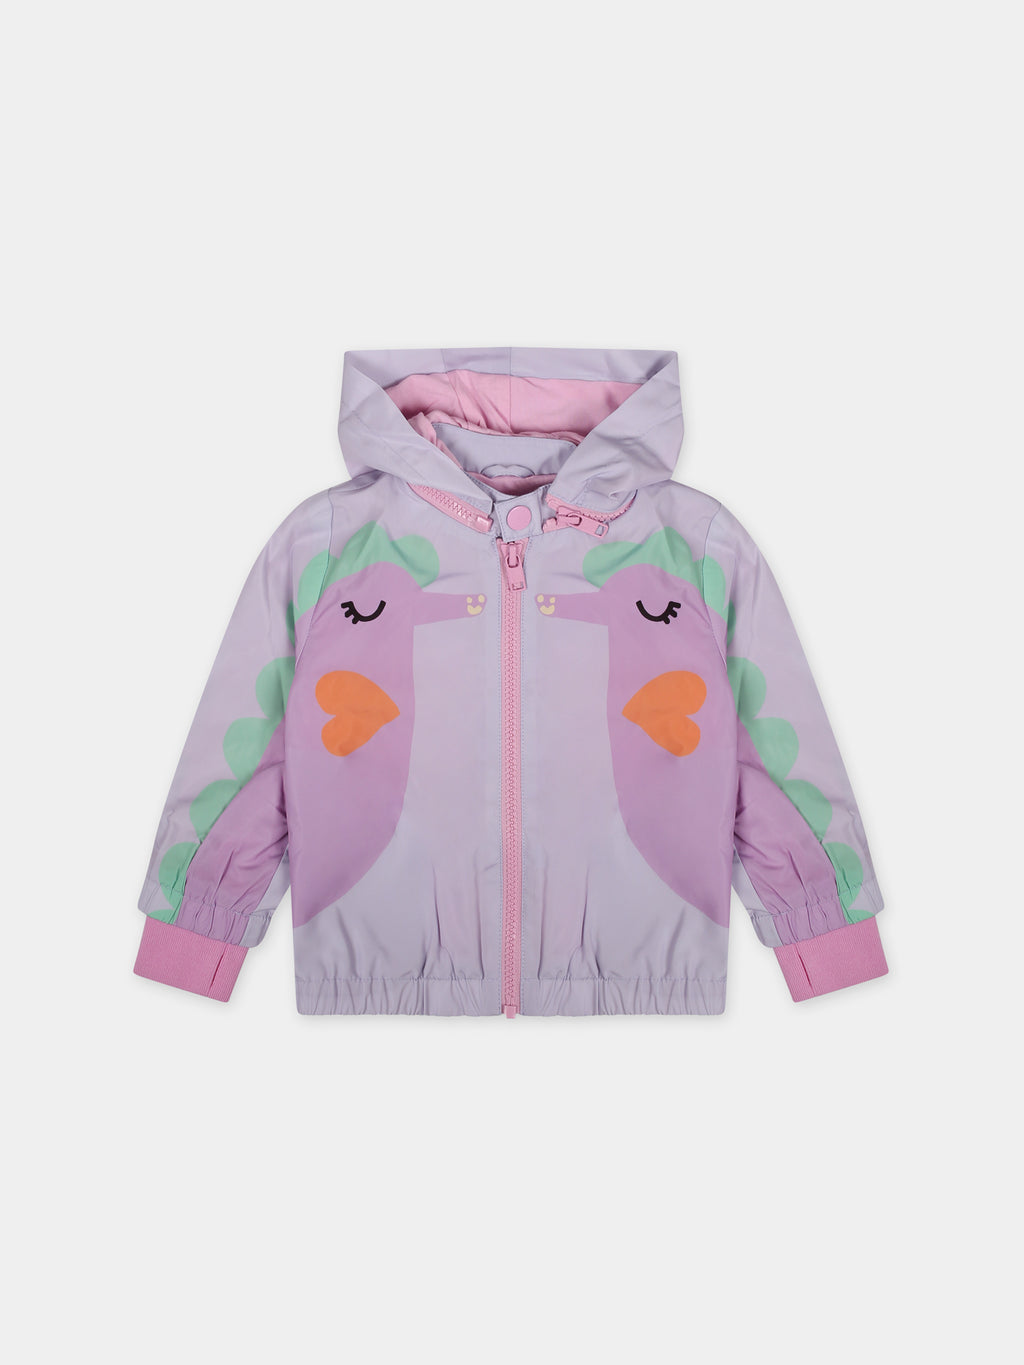 Pink windbreaker for baby girl with seahorse